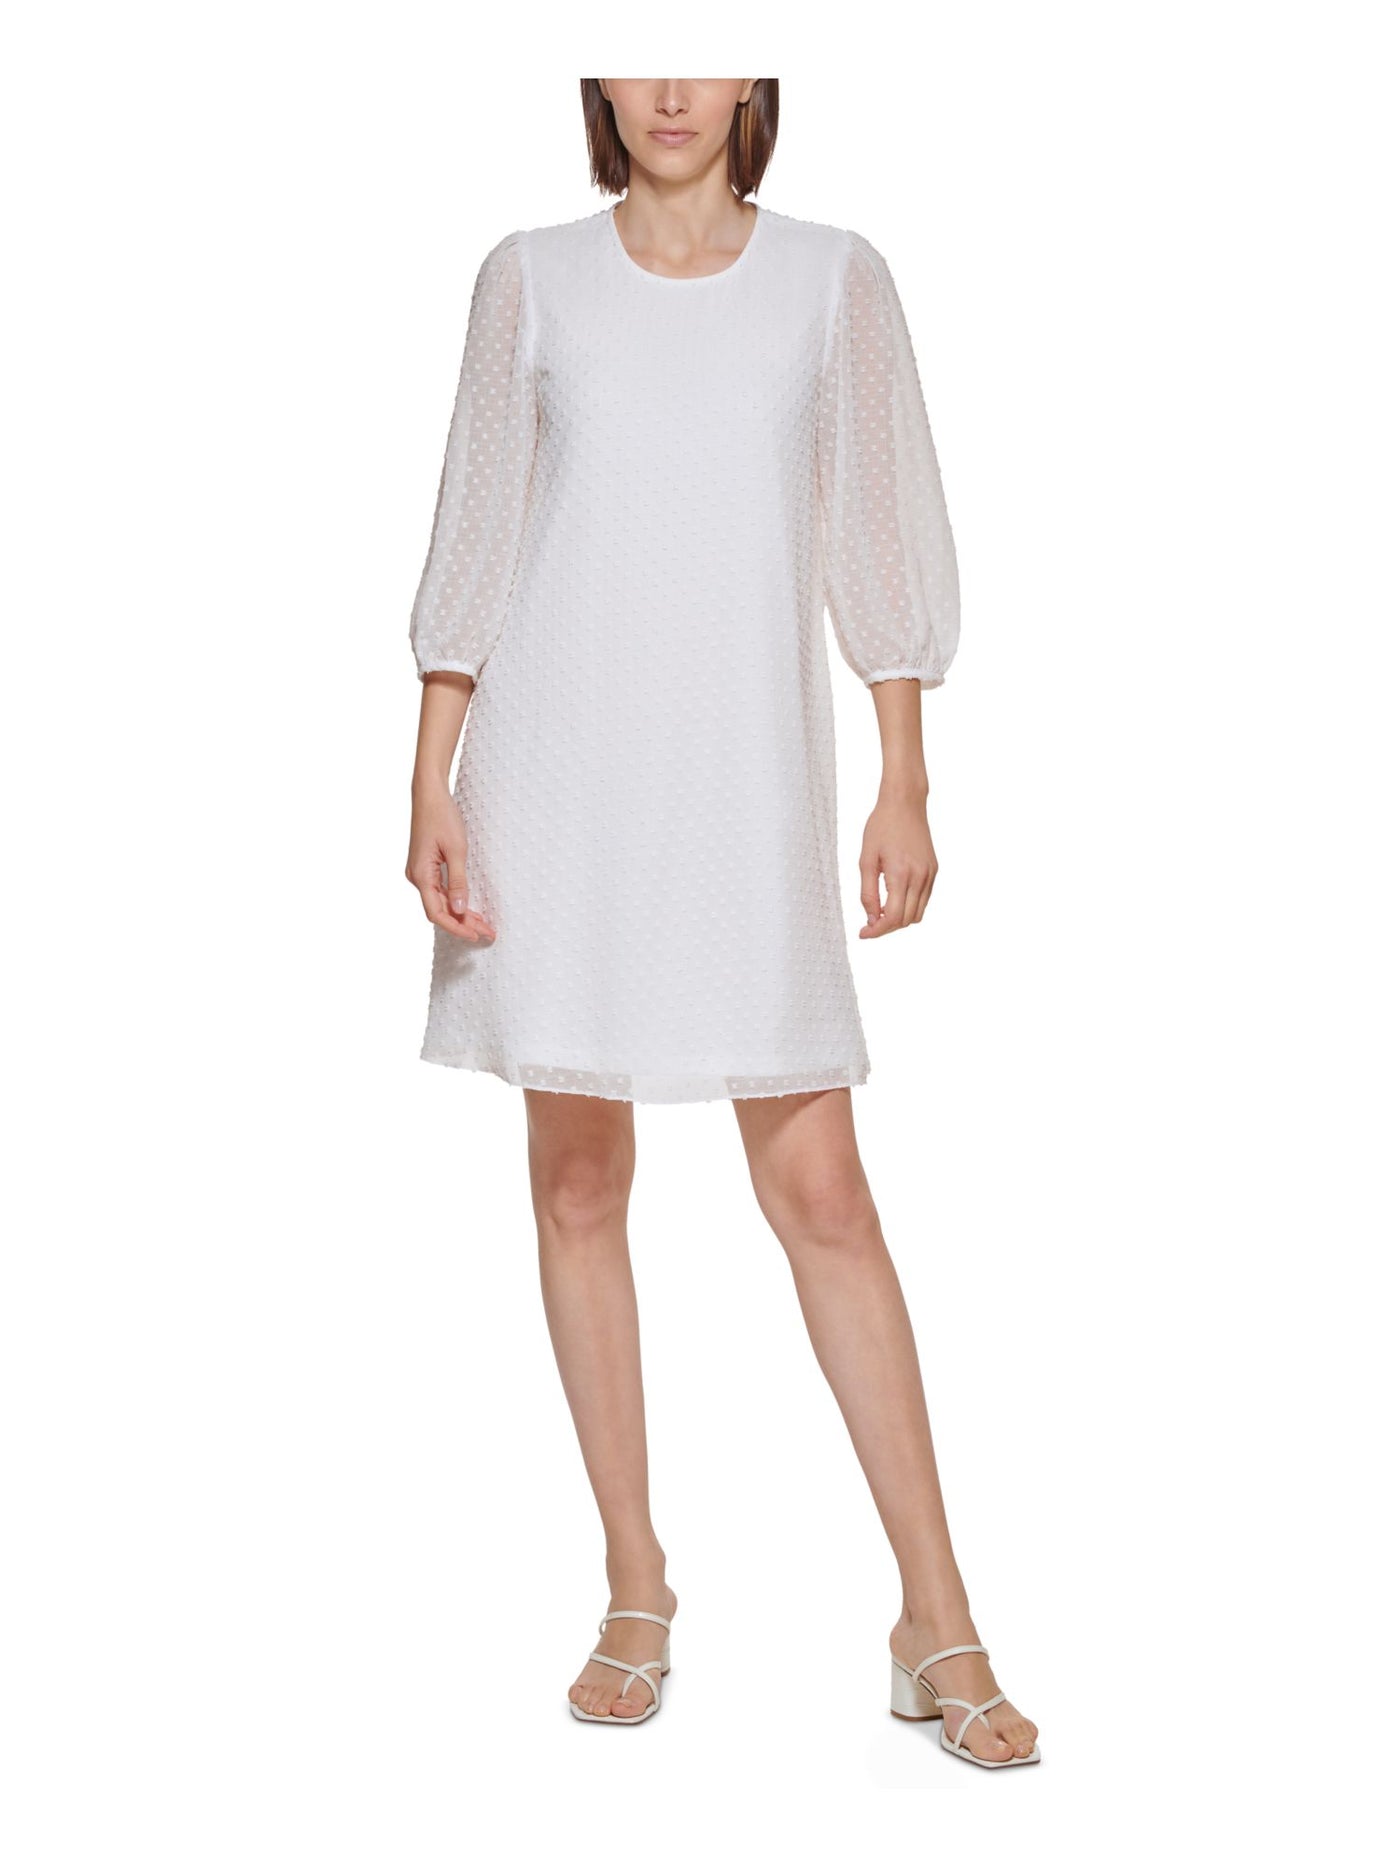 CALVIN KLEIN Womens White Sheer Swiss Dots Keyhole Closure Lined 3/4 Sleeve Round Neck Above The Knee Shift Dress 6